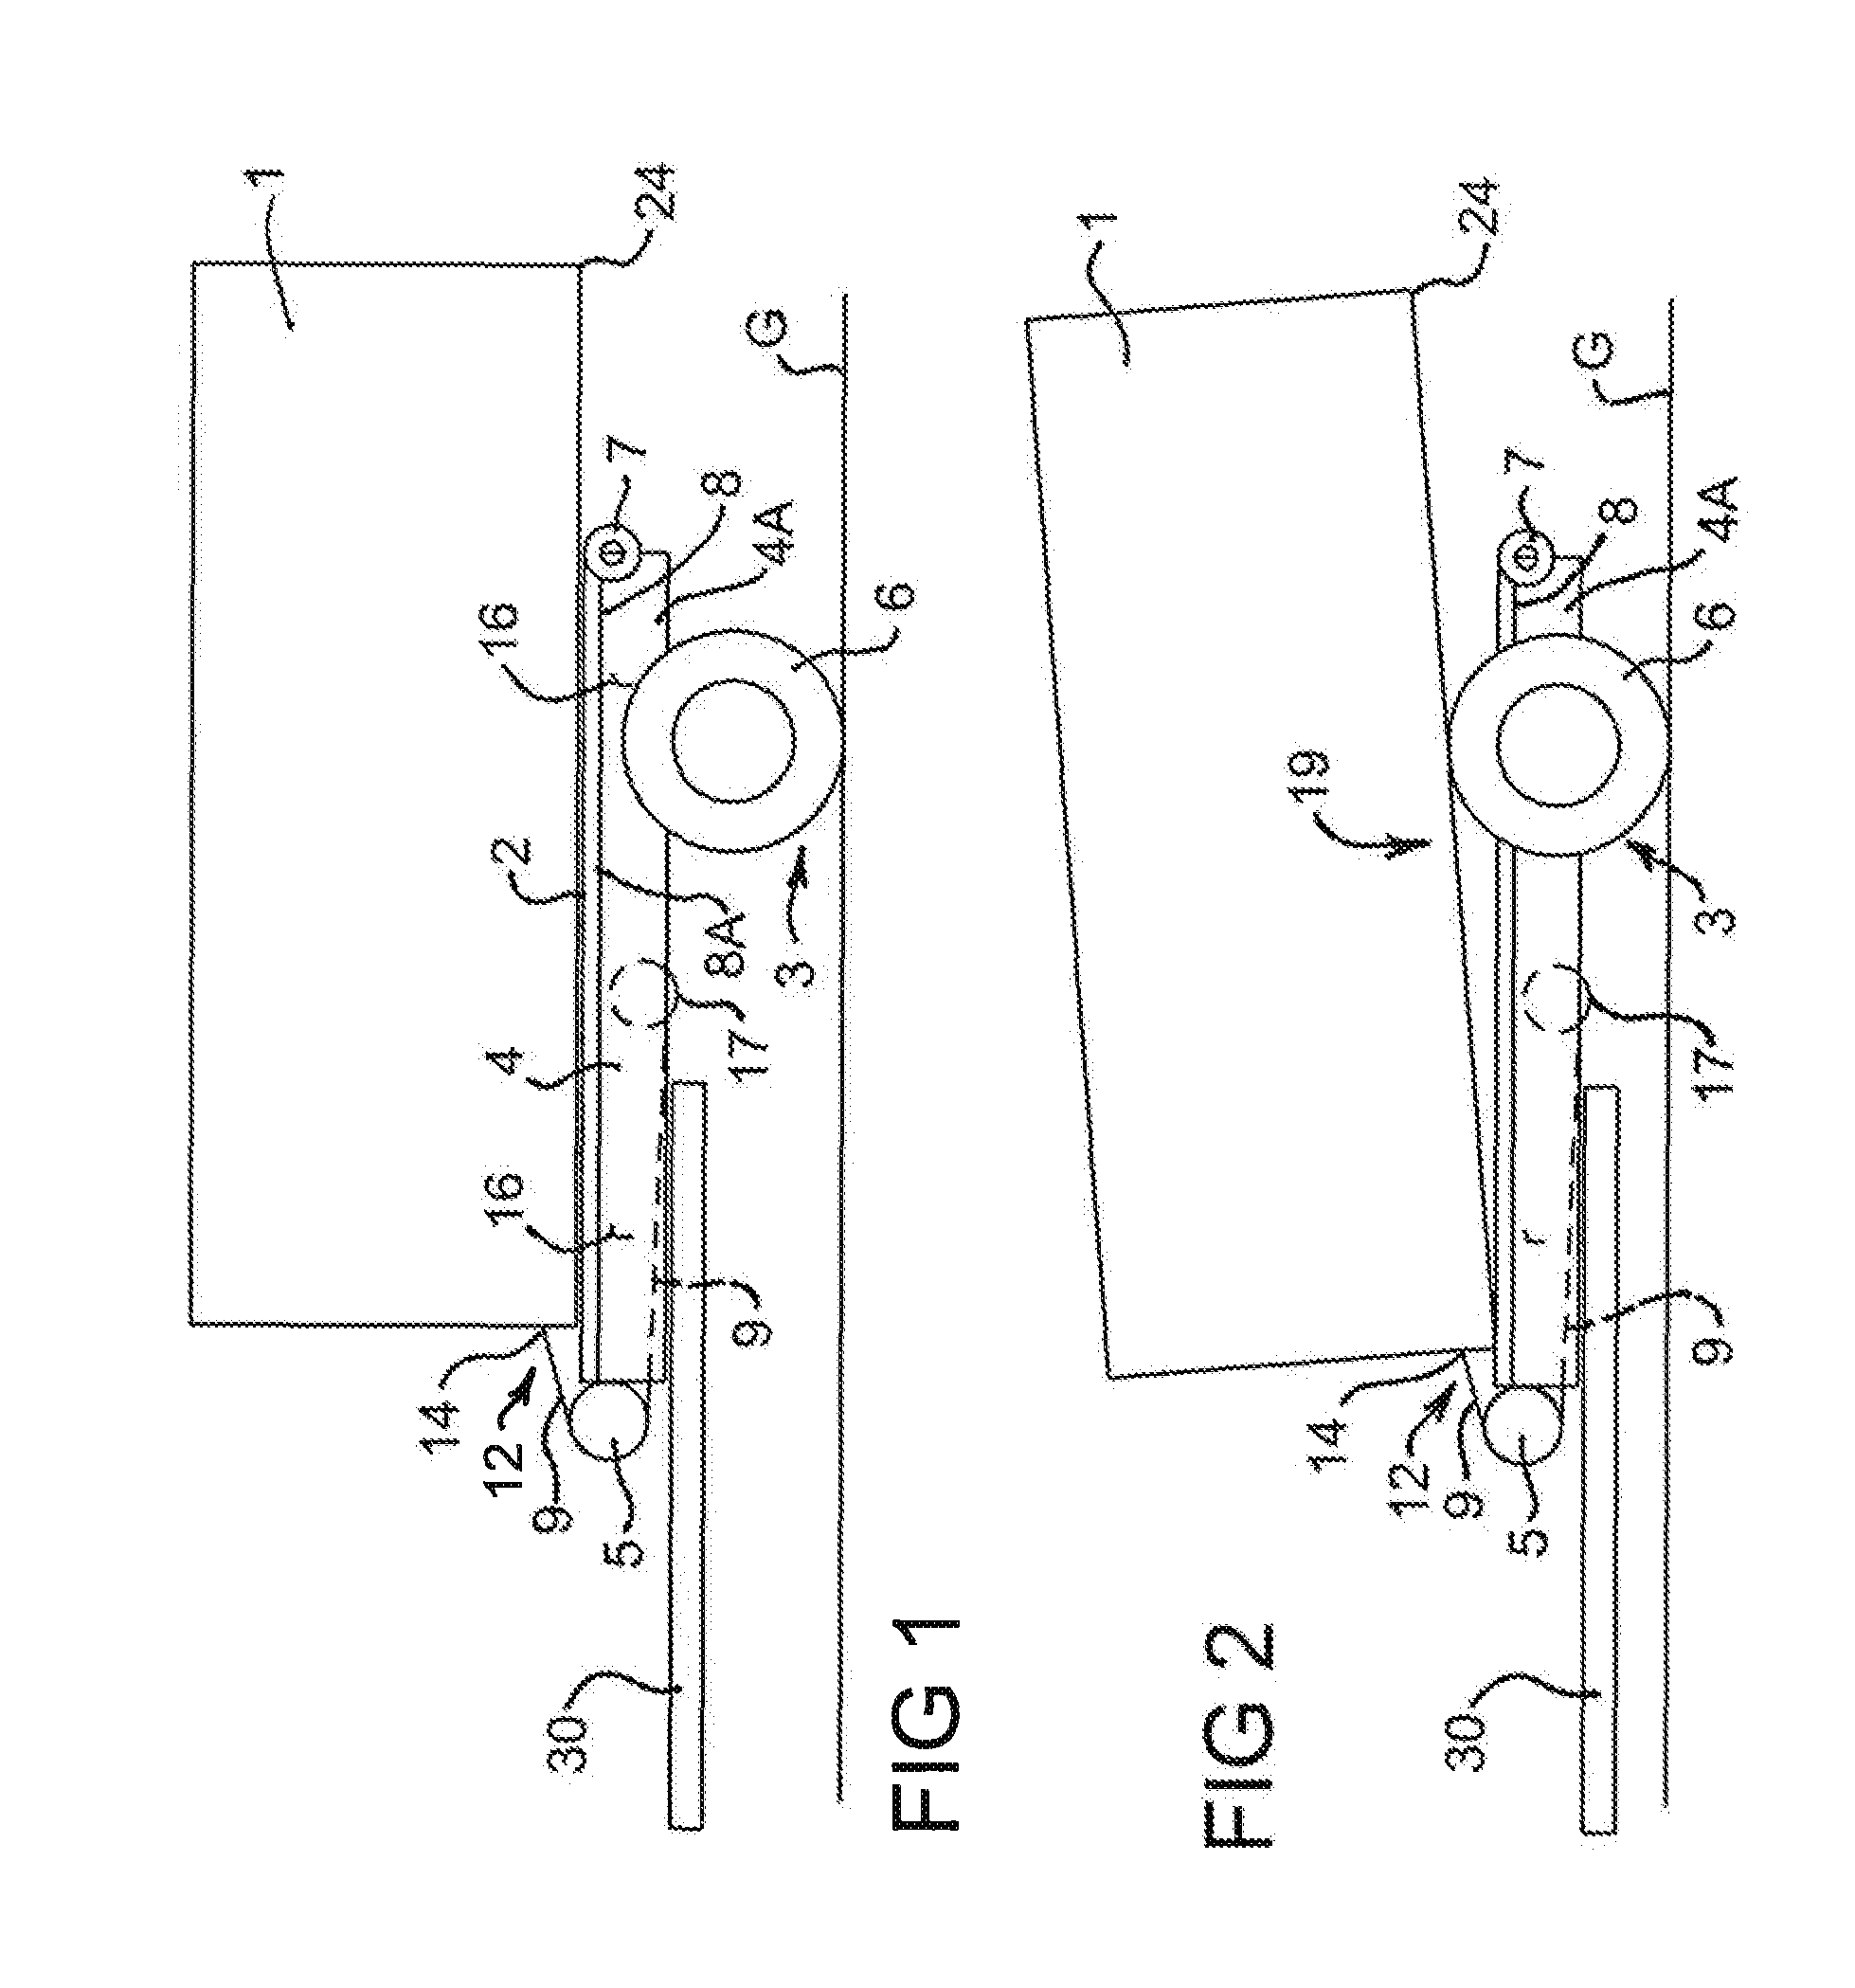 Loading and Unloading Arrangement for a Vehicle